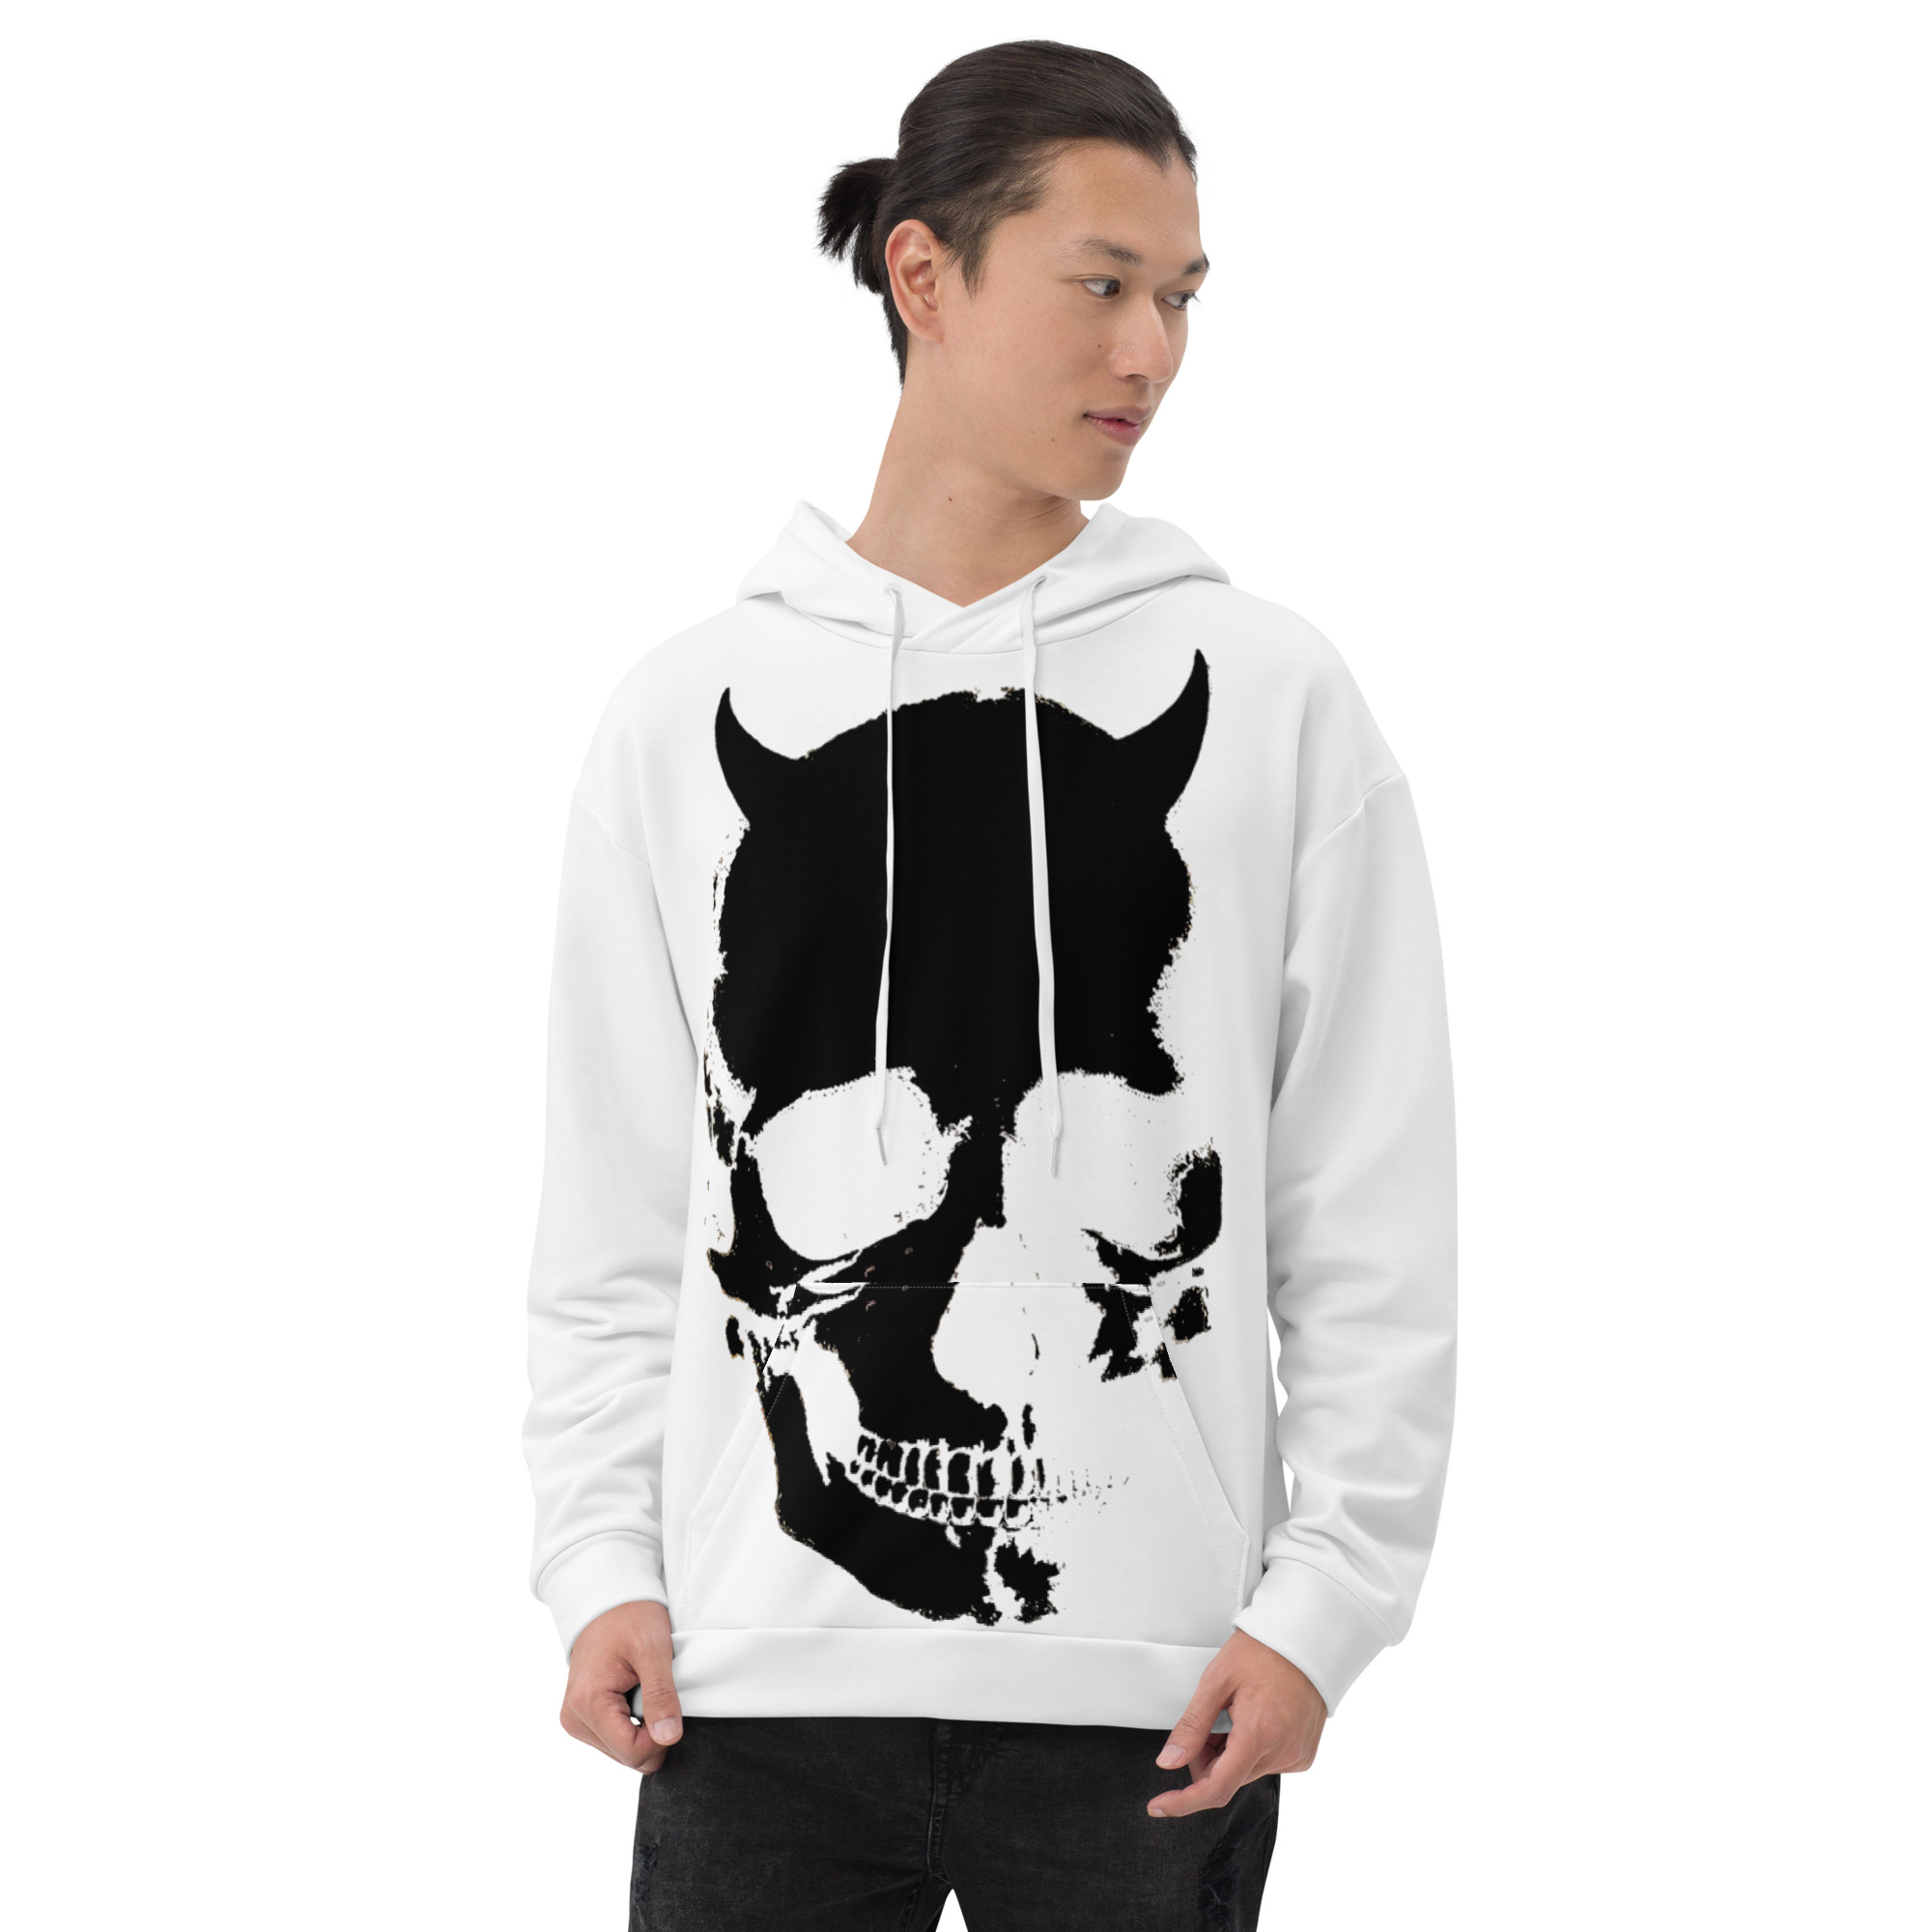 all-over-print-unisex-hoodie-white-front-63c8680f51173.jpg